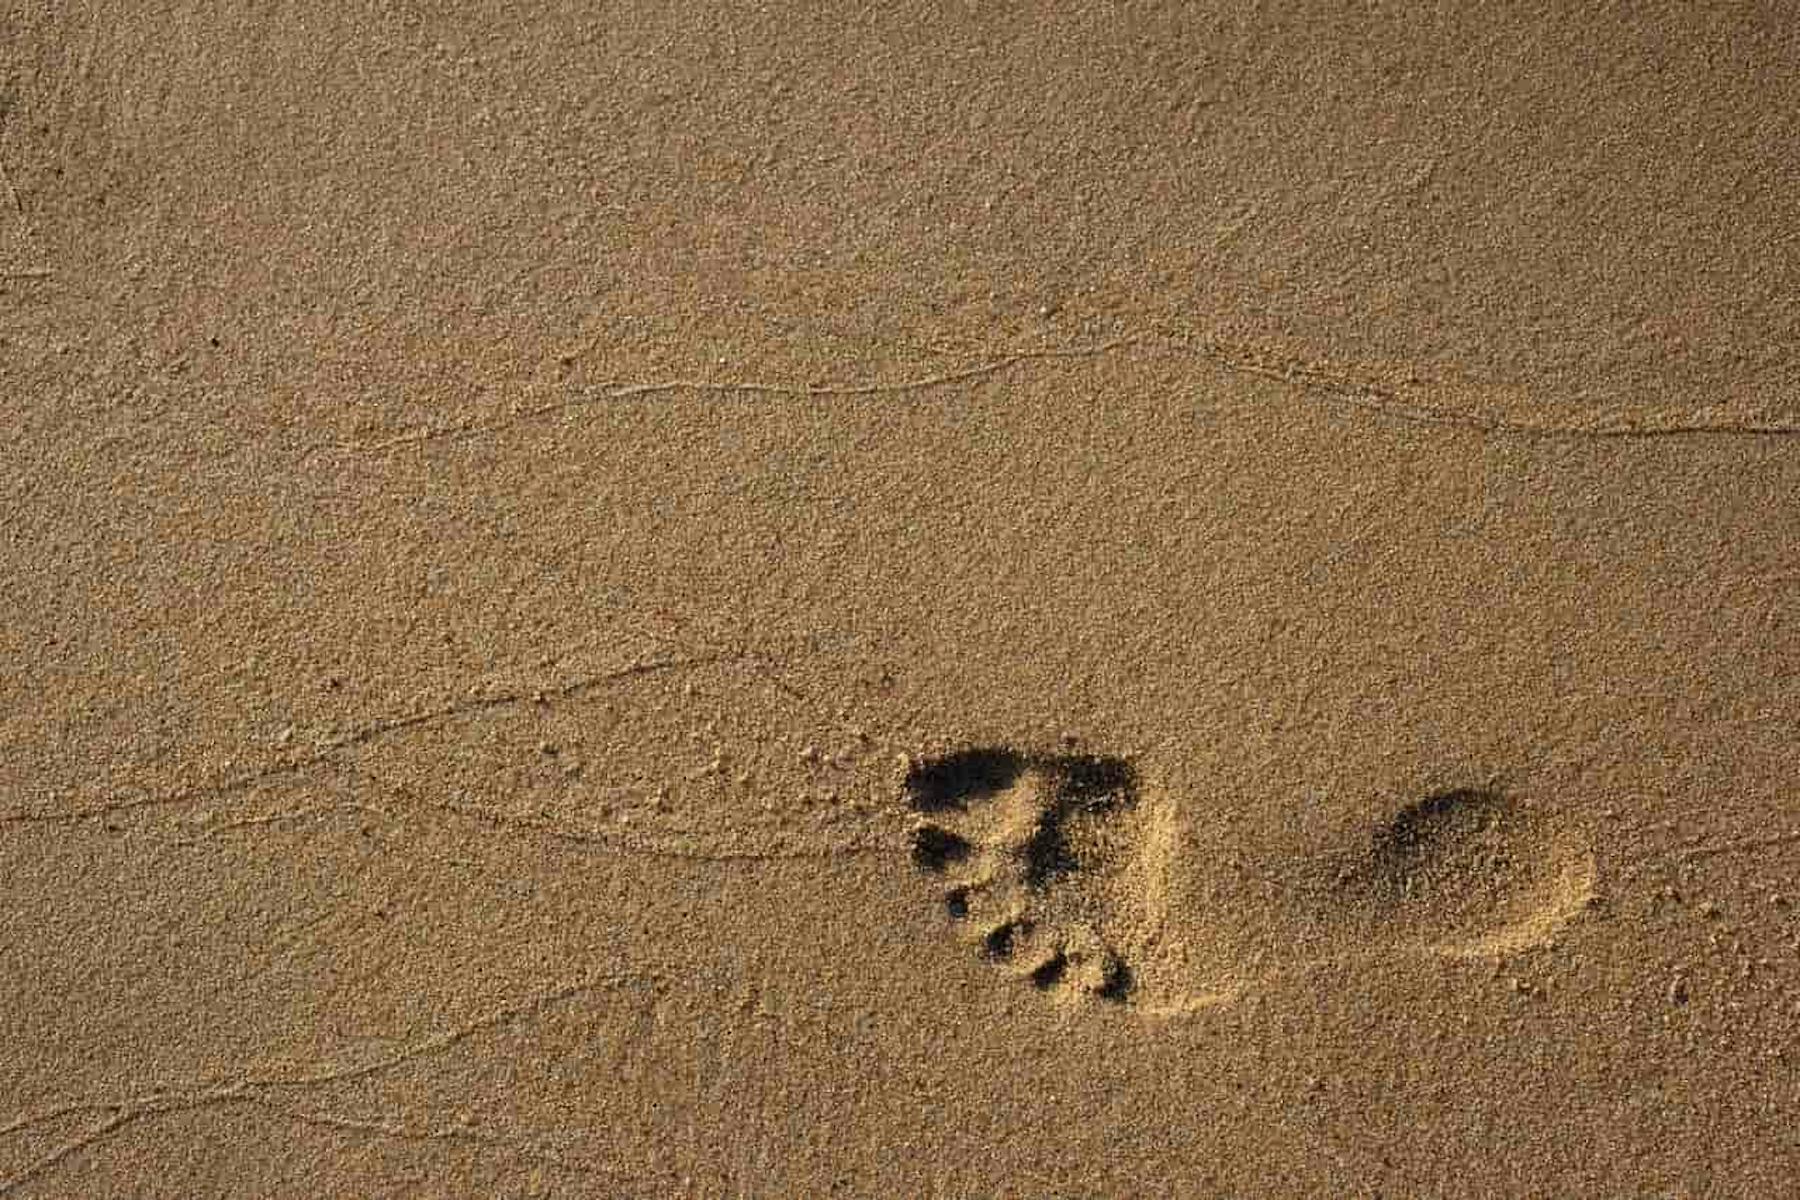 A footprint in the sand 